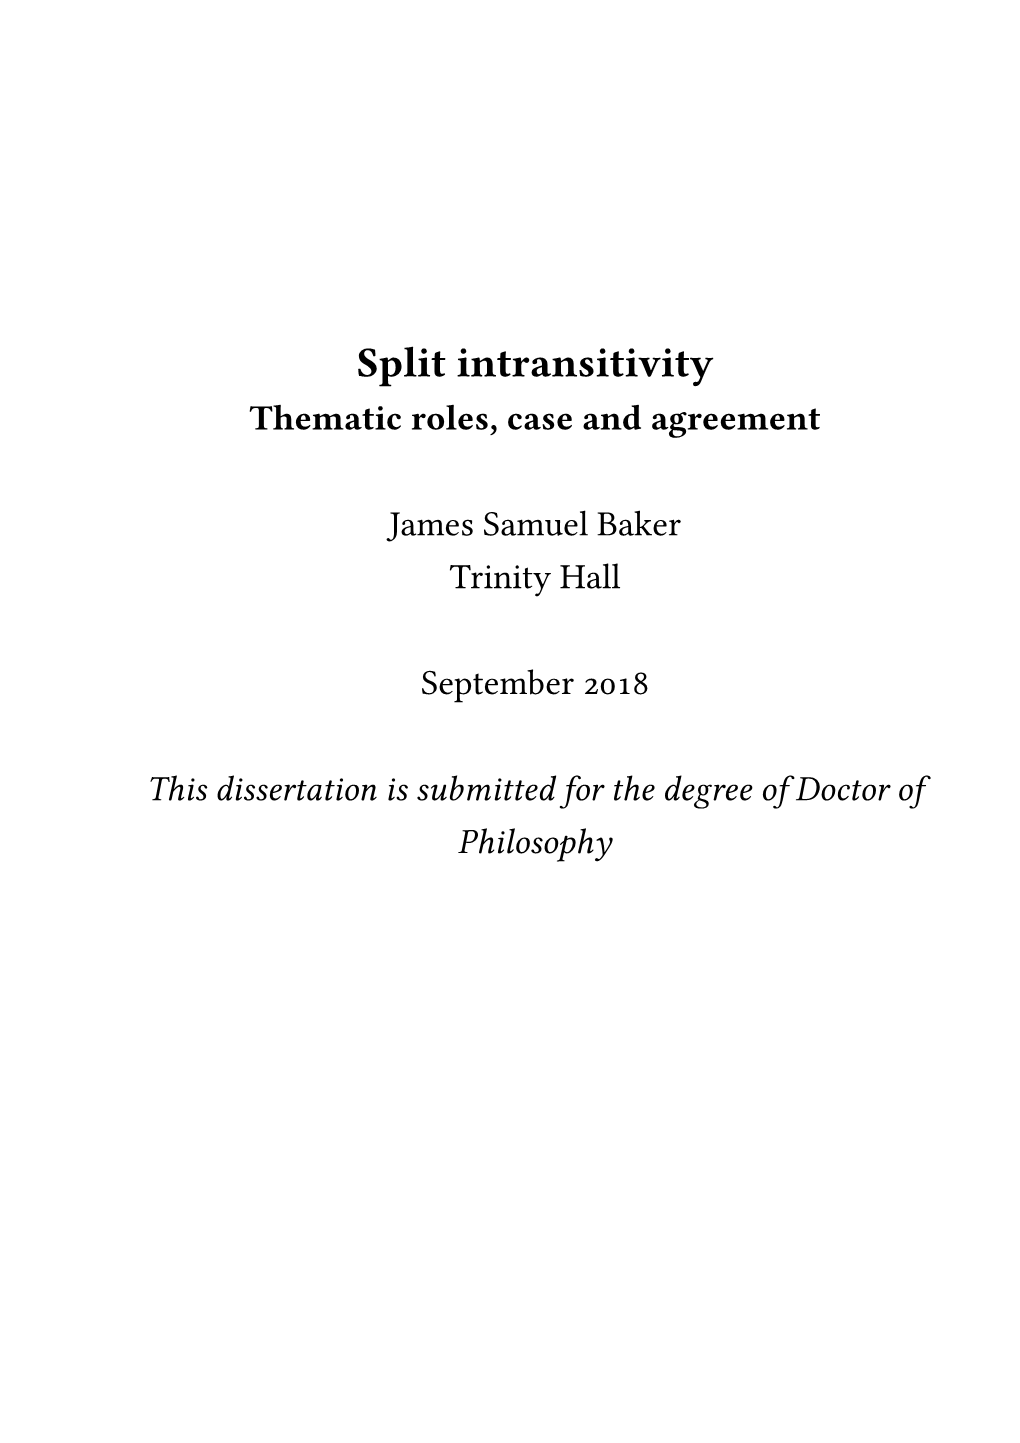 Split Intransitivity Thematic Roles, Case and Agreement